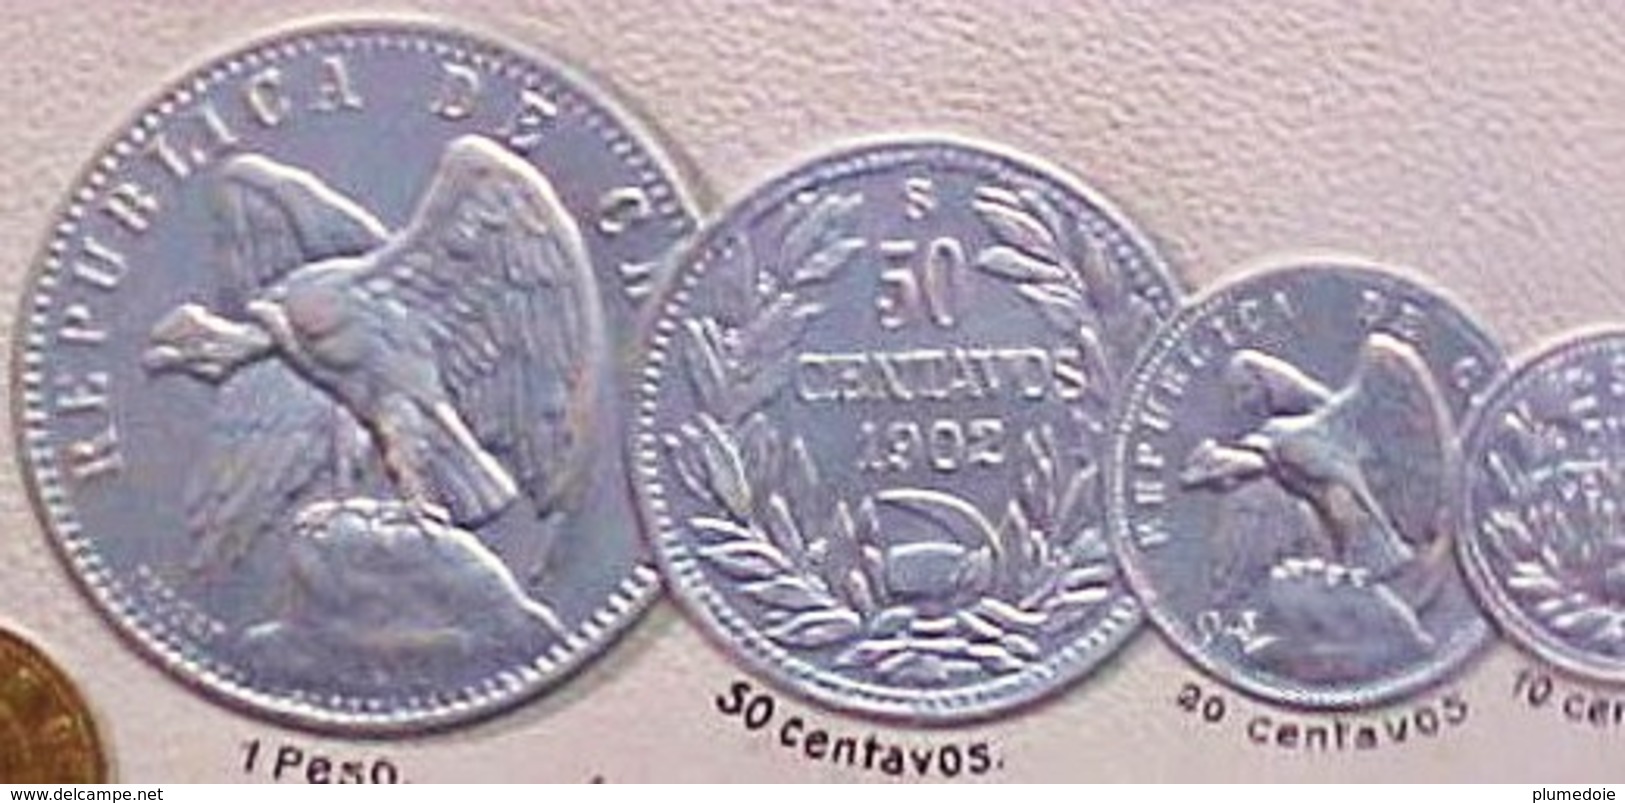 Cpa Gaufree MONNAIES Pièces Du CHILI 1902 PESO CENTAVOS OR ARGENT CUIVRE, Embossed COIN PESOS Gold Silver Early Pc - Coins (pictures)